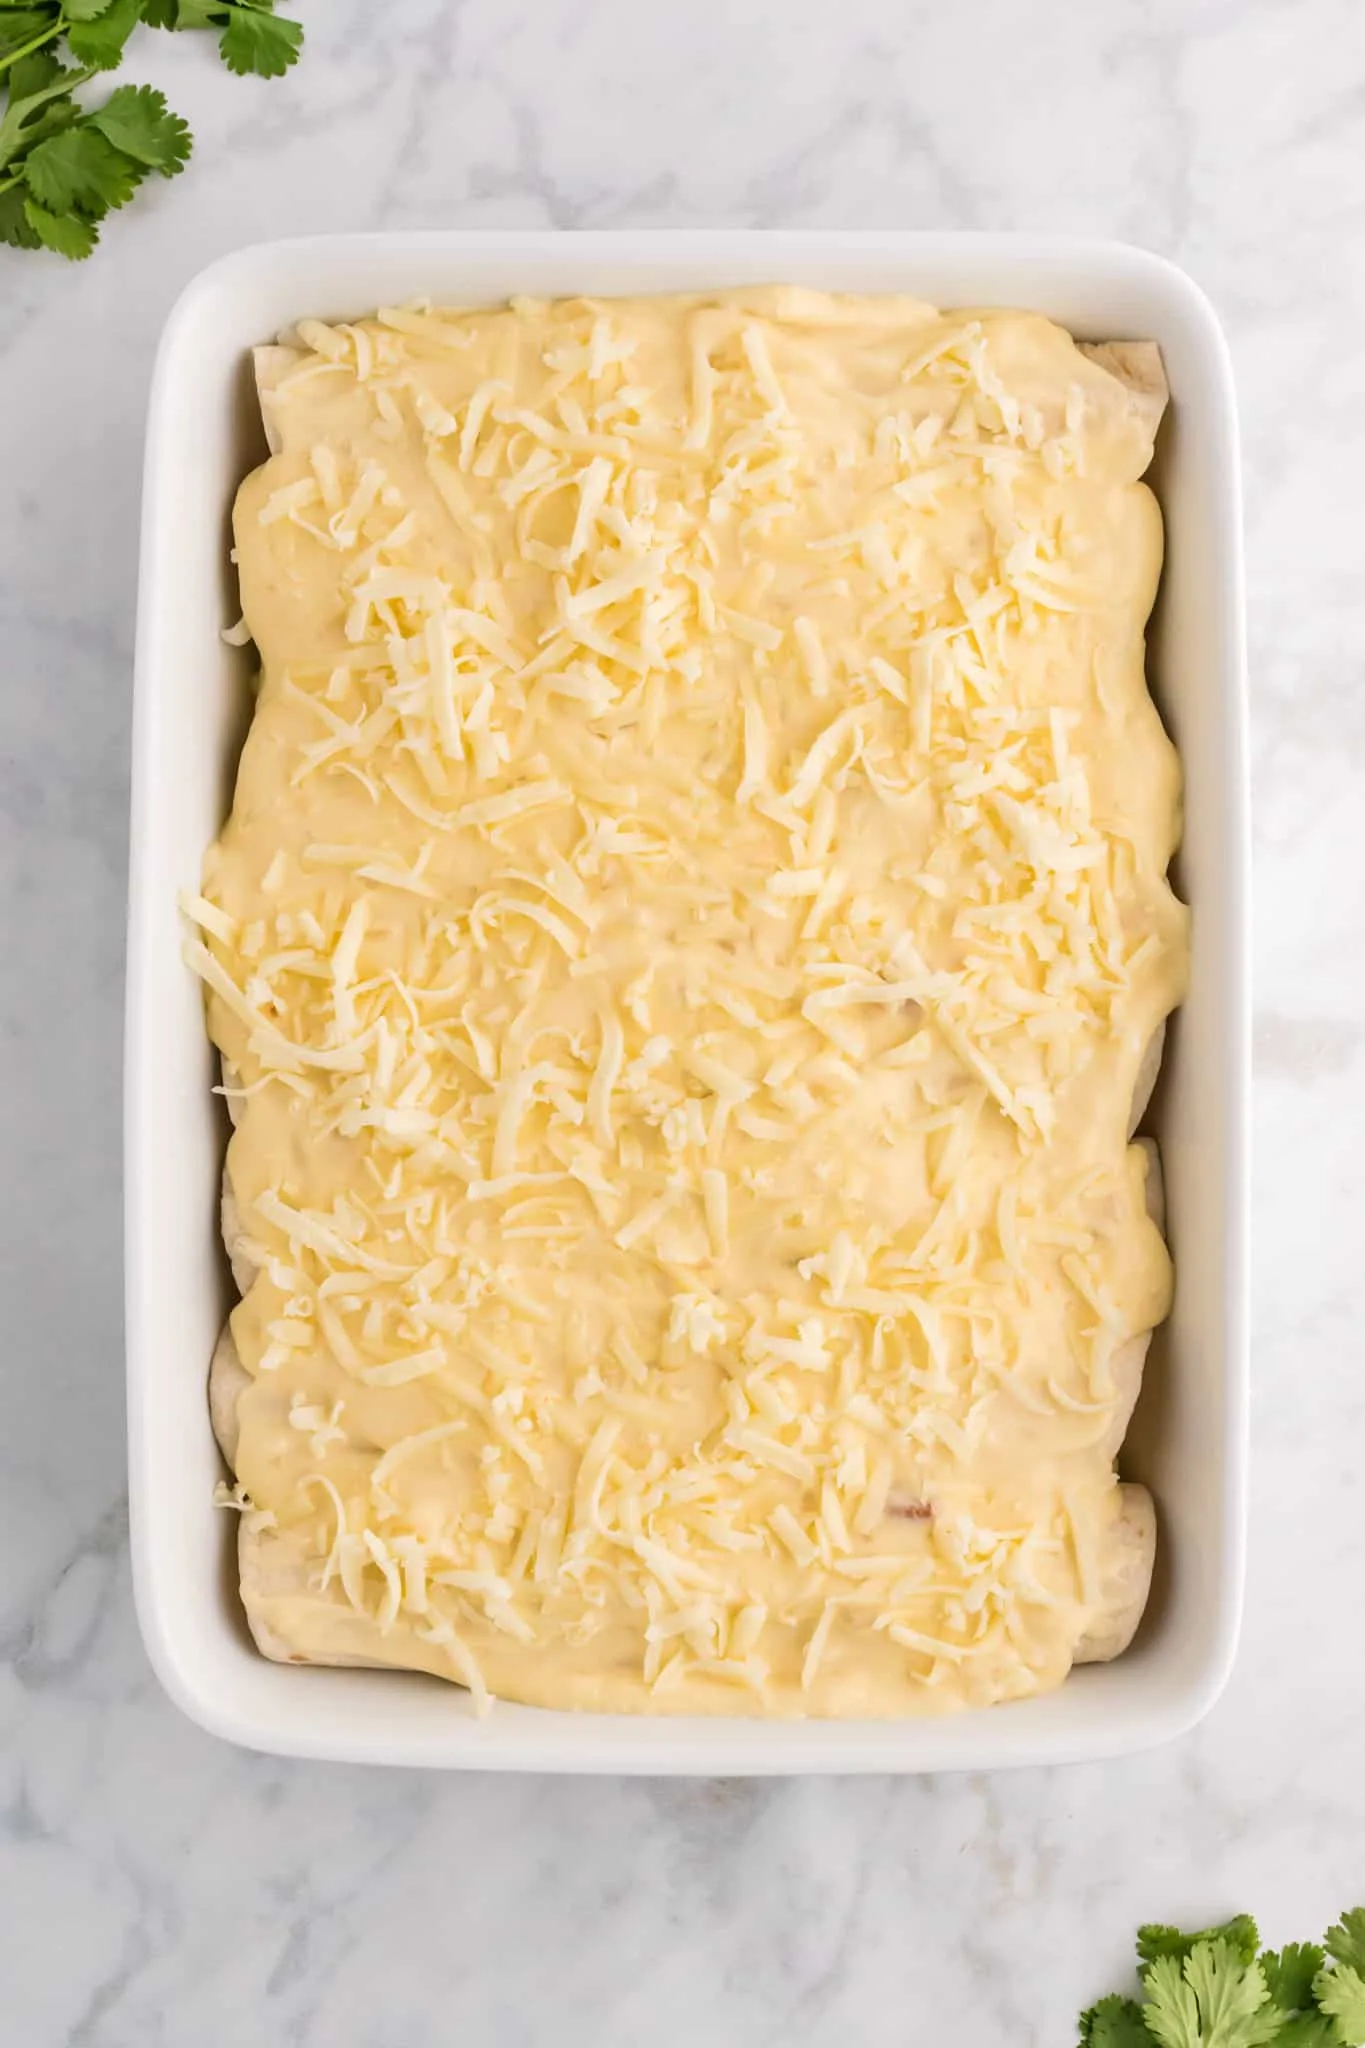 shredded cheese and cream sauce on top of enchiladas in a baking dish